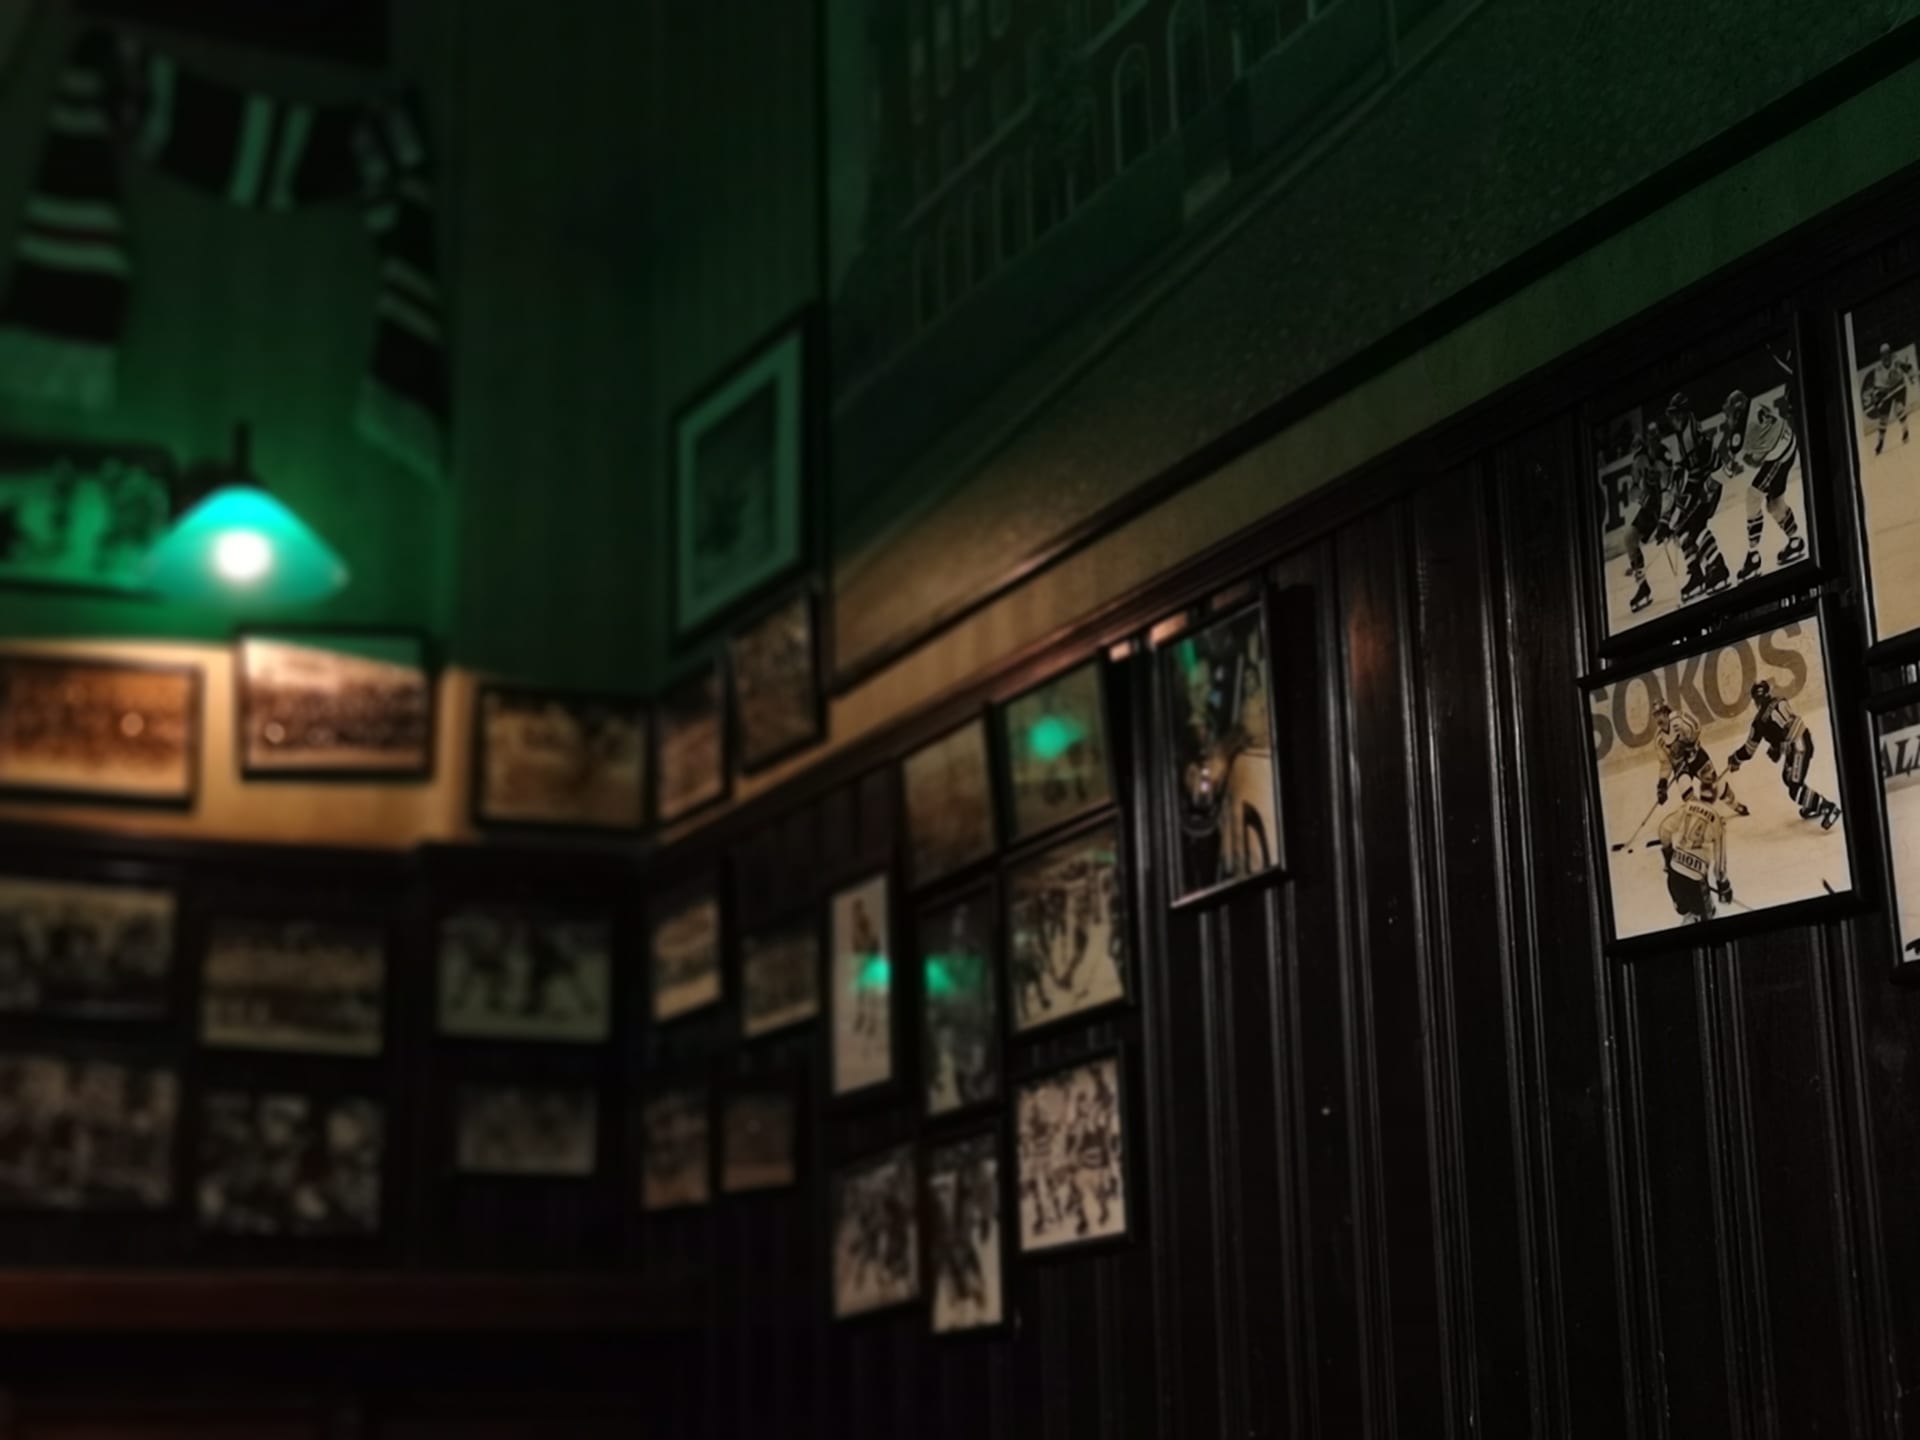 Hockey history can be seen on the pub walls.